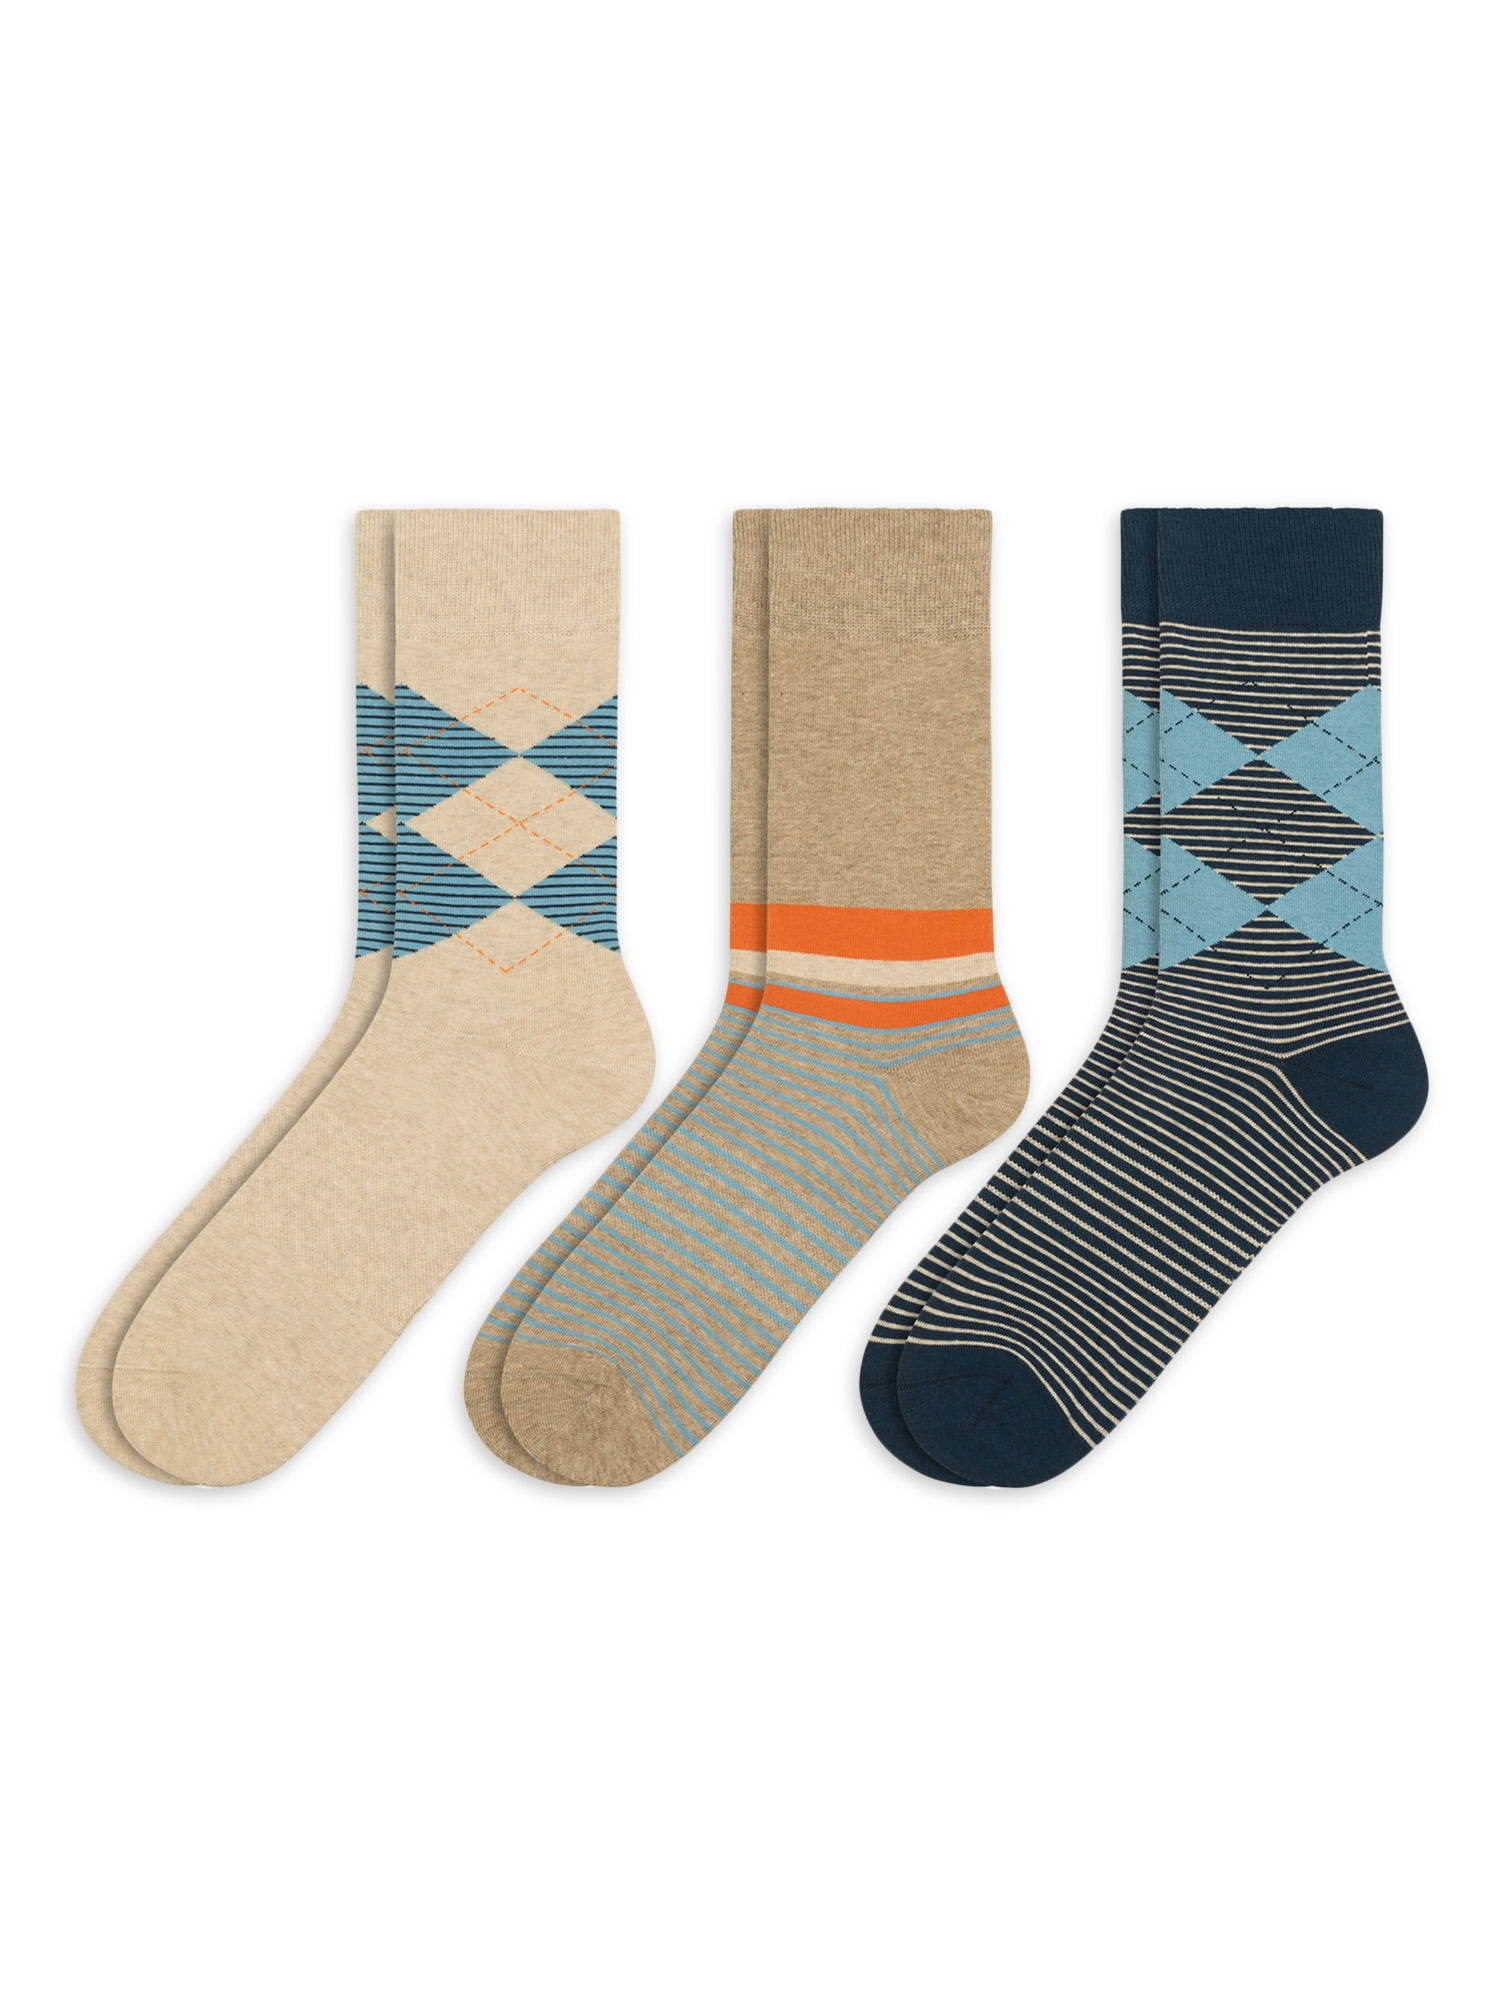 GEORGE - George Men's Combed Cotton Patterned Crew Socks ,3 Pack ...